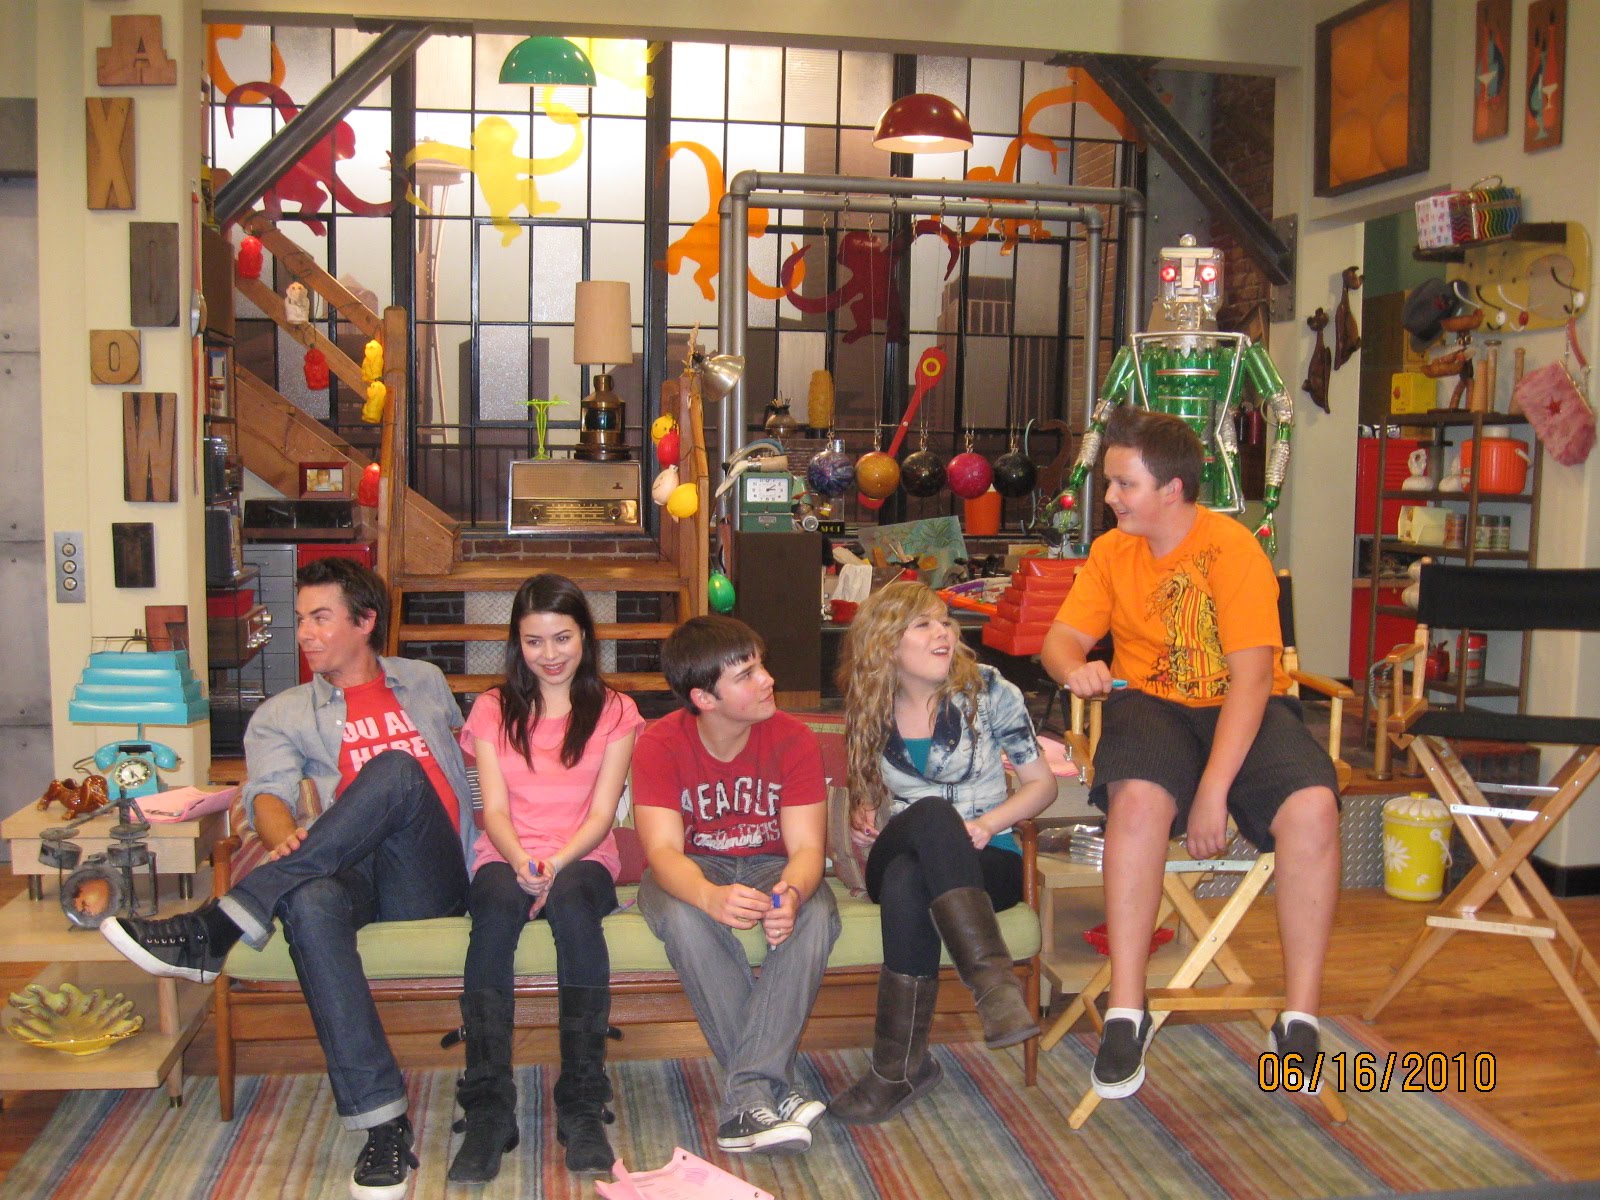 Gallery of Icarly New Room.